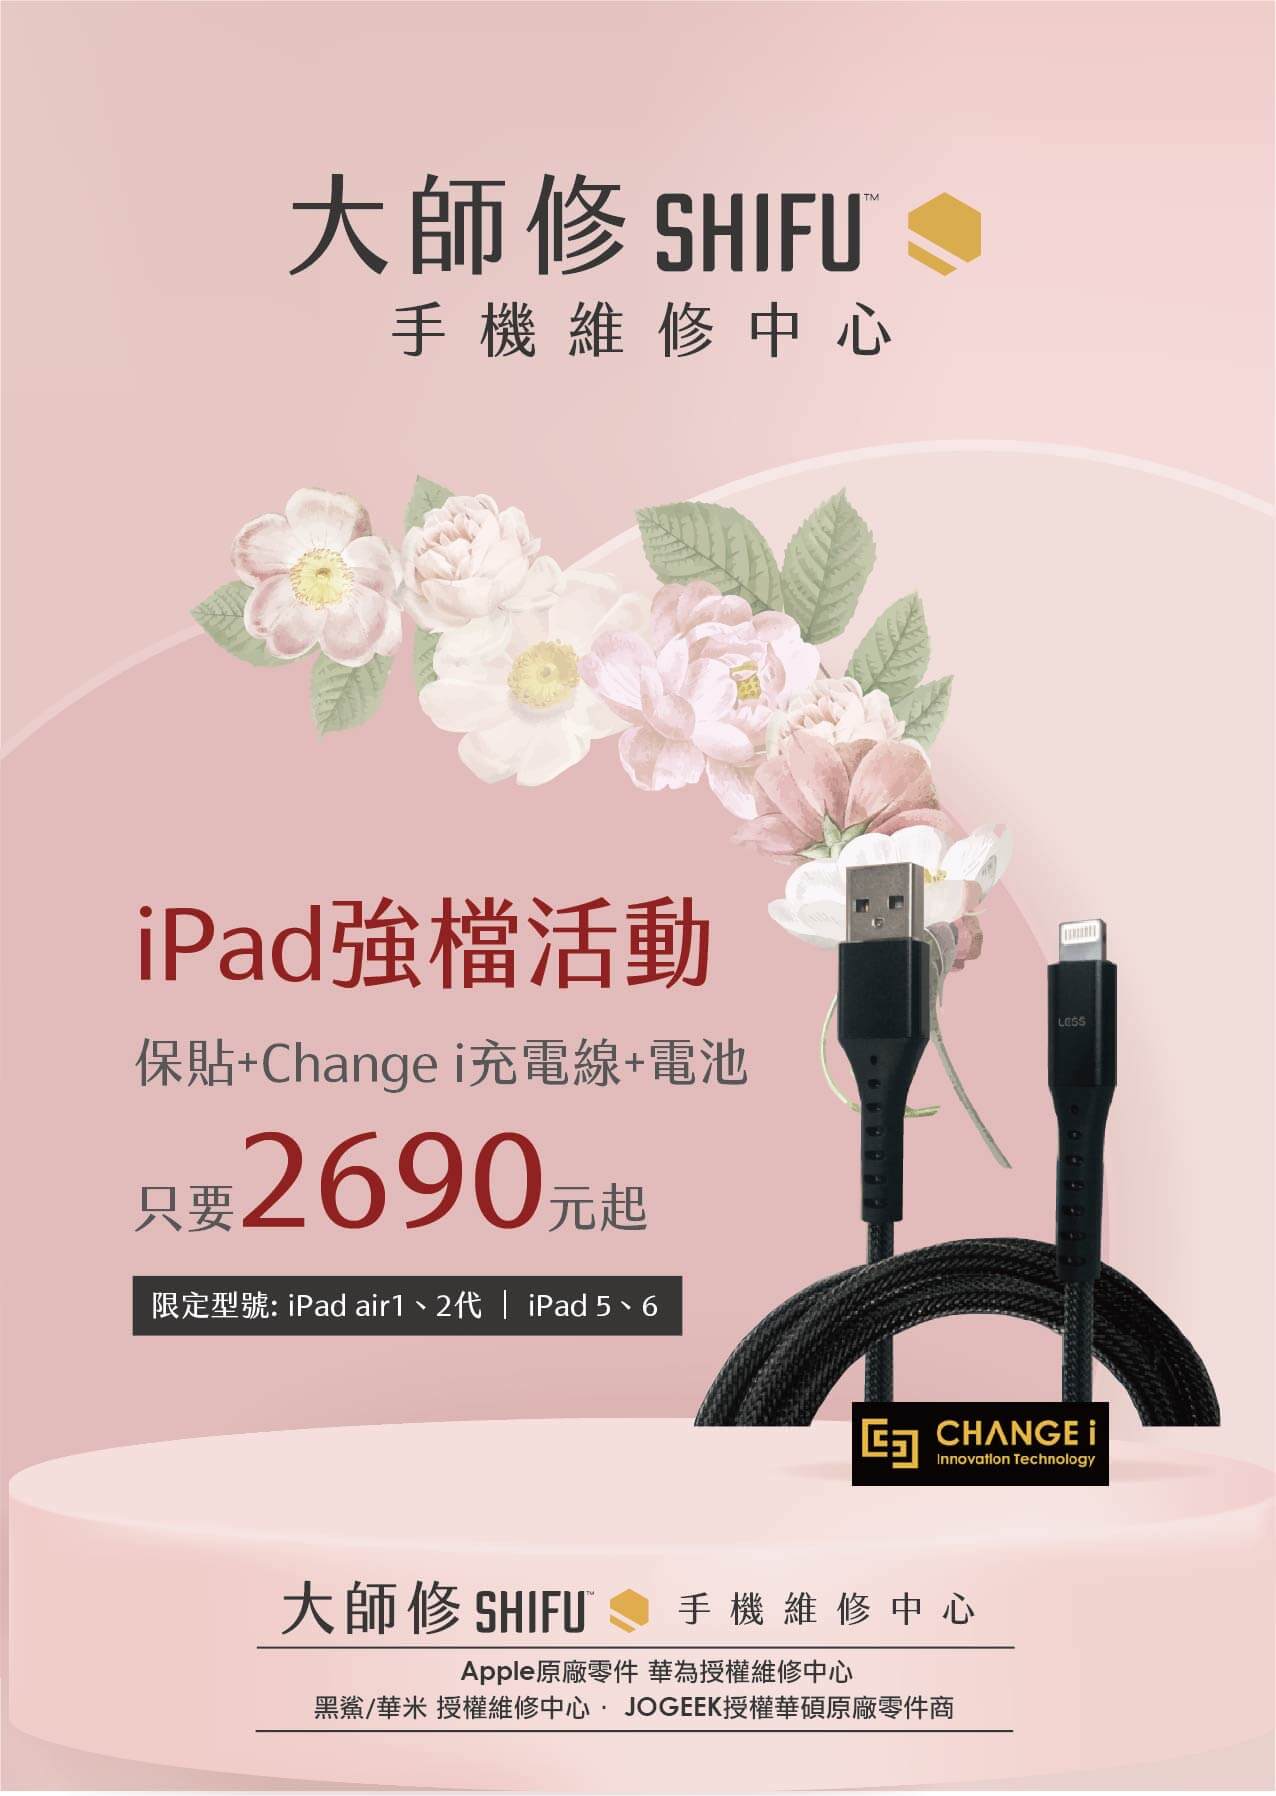 You are currently viewing 大師修五月母親節 iPad 超值活動